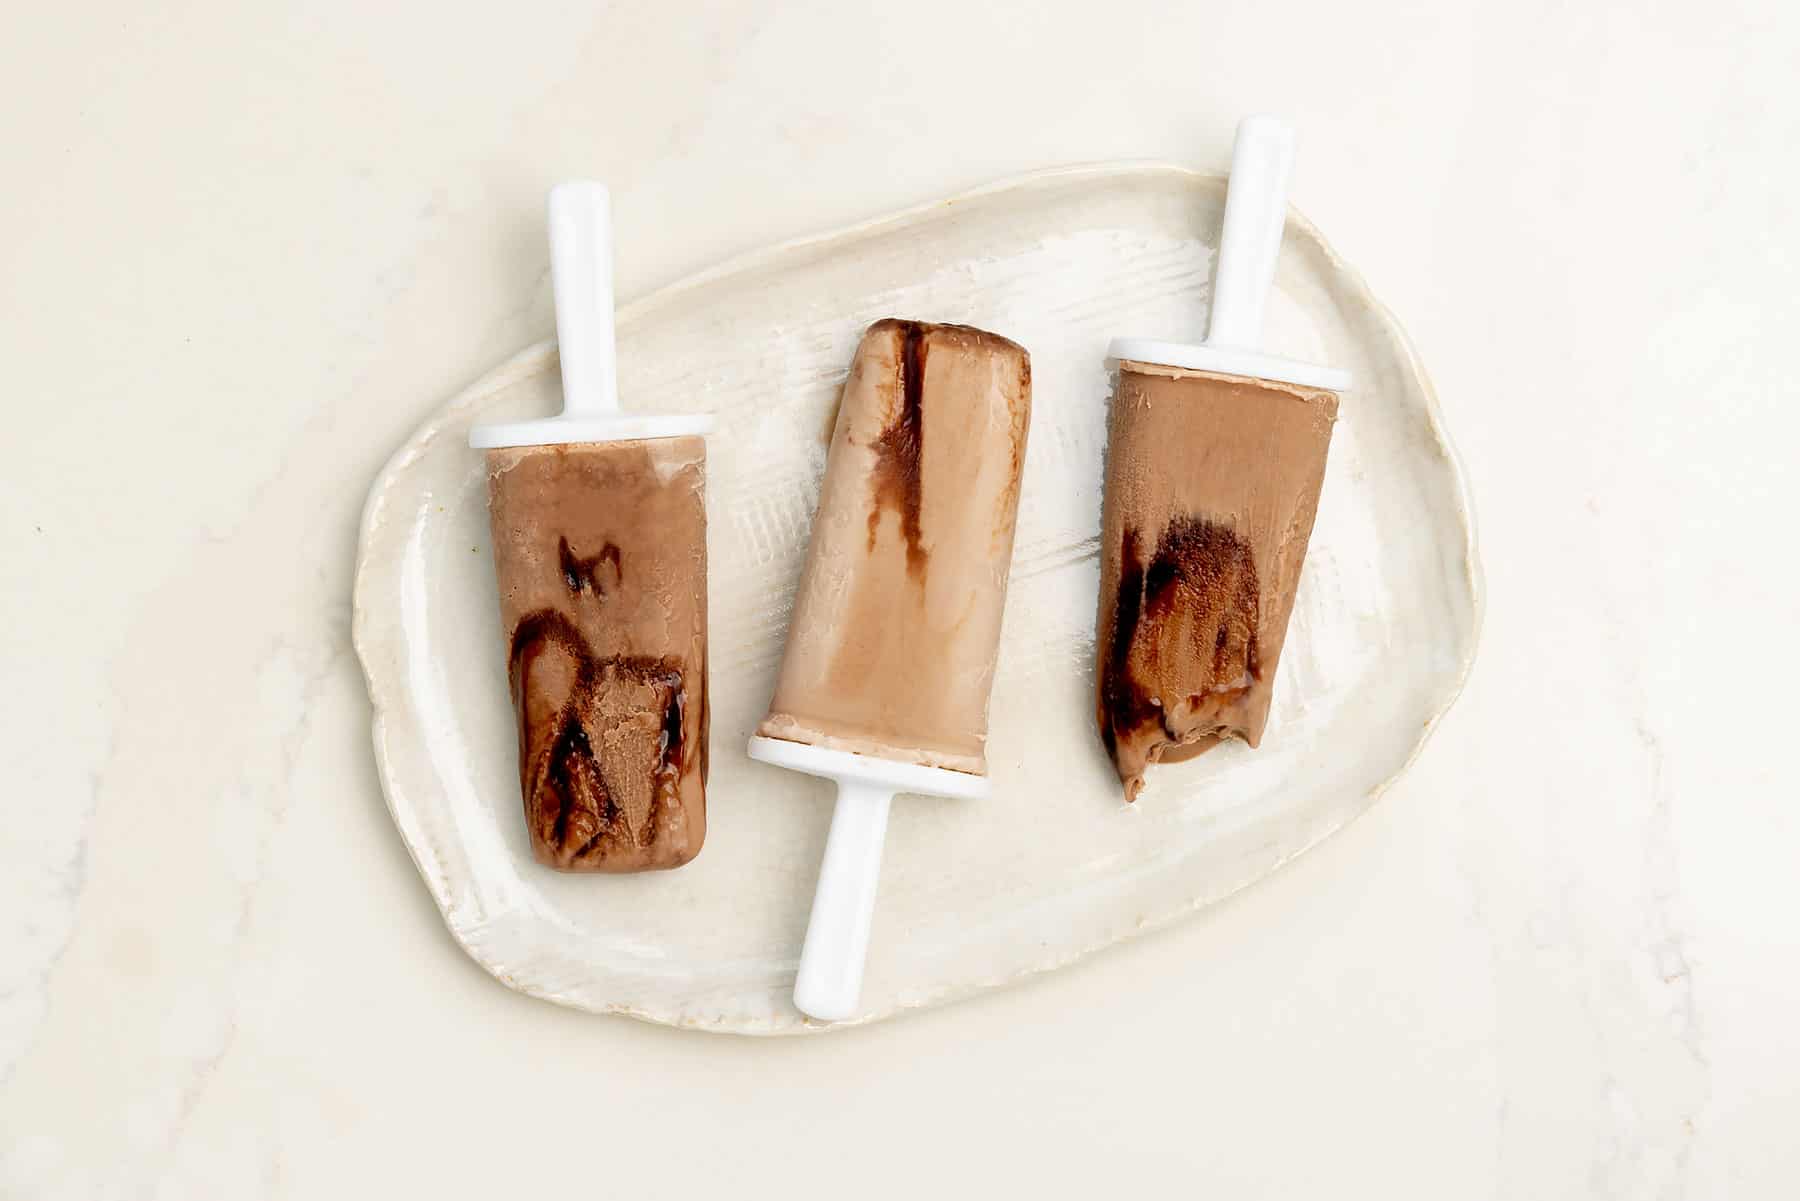 Vanilla and chocolate popsicle.